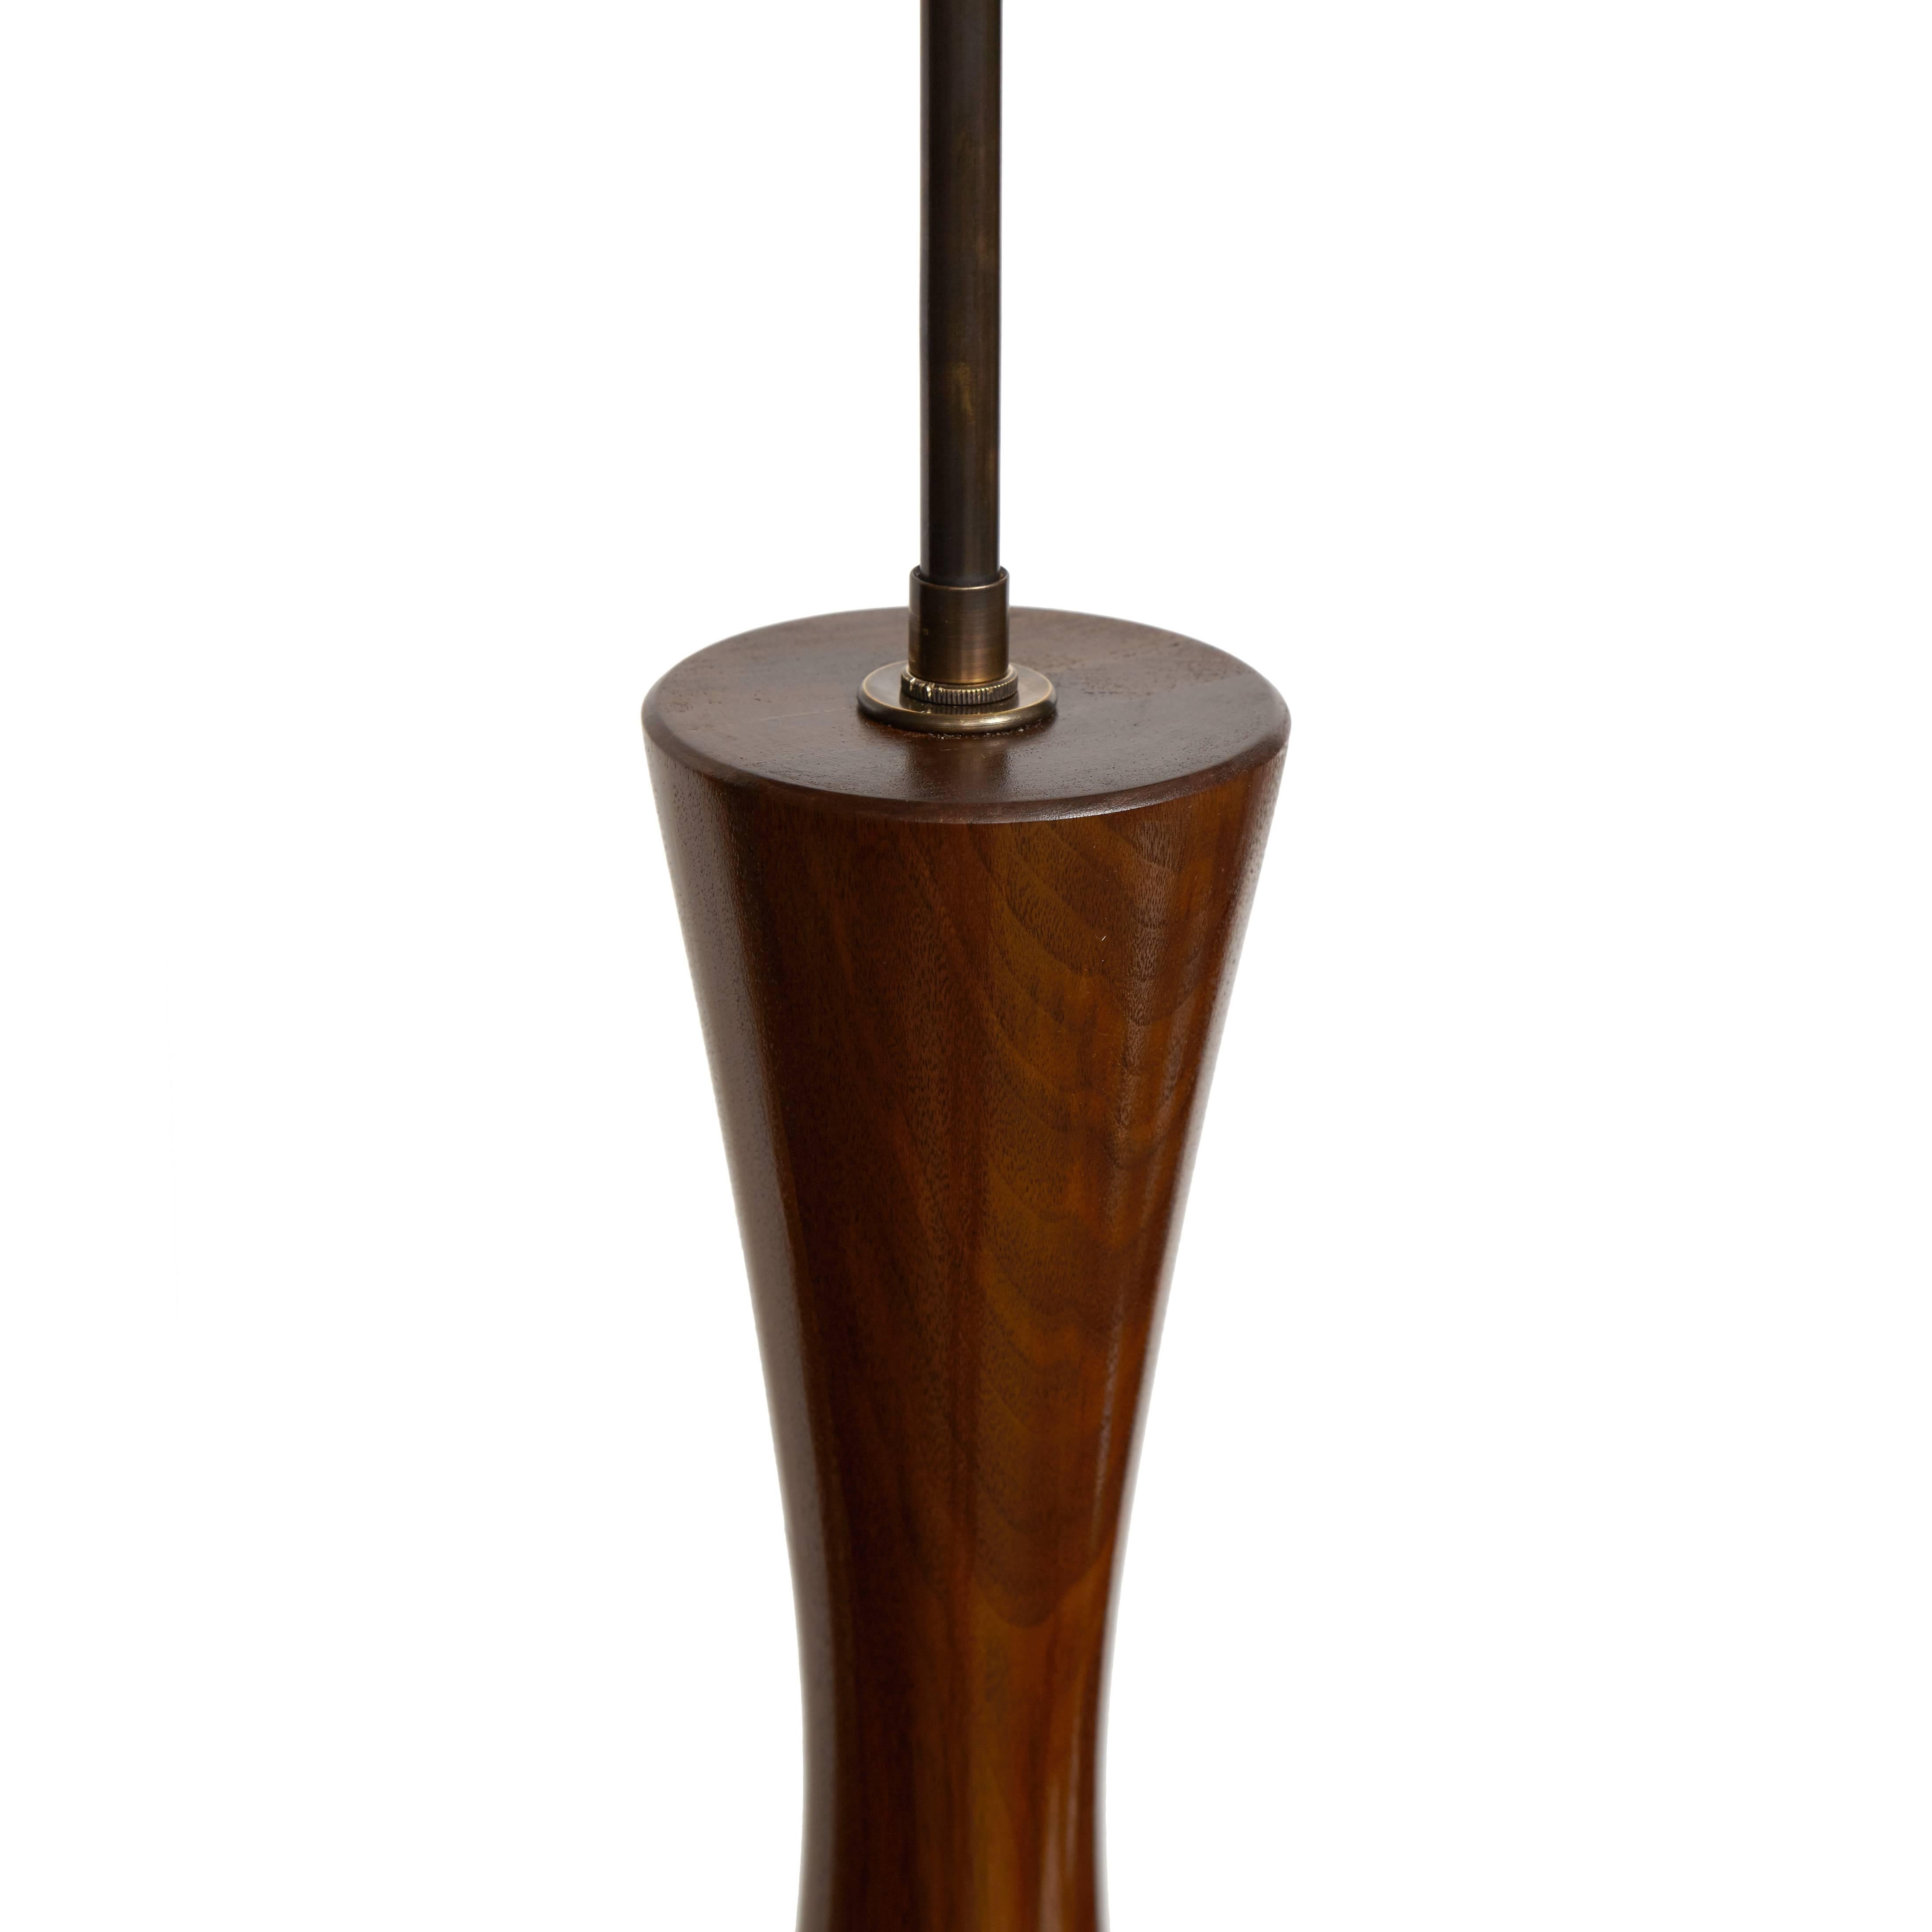 Pair of Eichel walnut table lamp turned from solid walnut.
Base height-24

Custom orders have a lead time of 10-12 weeks FOB NYC. Lead time contingent upon selection of finishes, approval of shop drawings (if applicable), and receipt COM (if